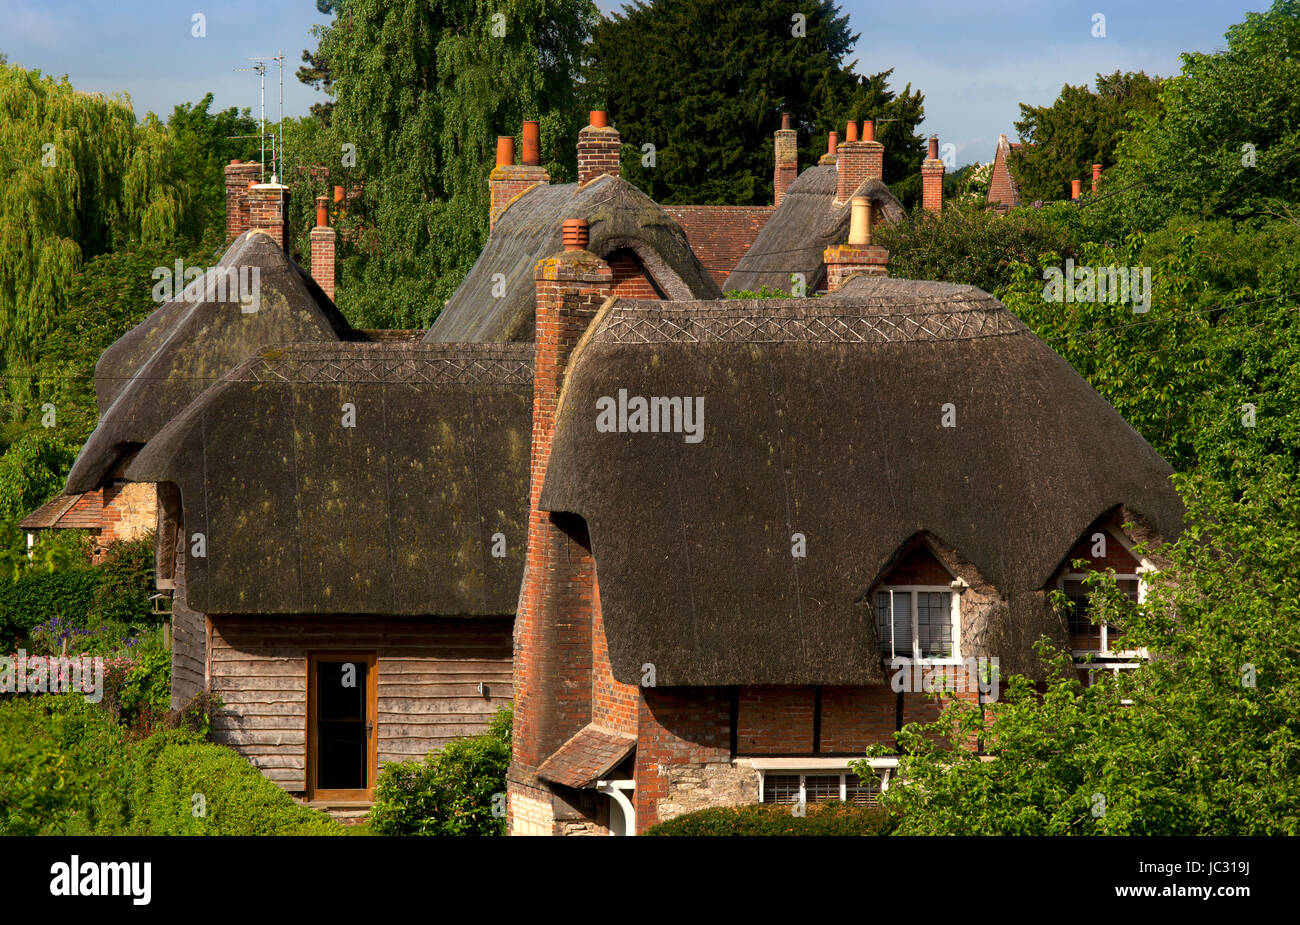 Thatched cottages in village of Clifton Hamden, Oxfordshire,England Stock Photo